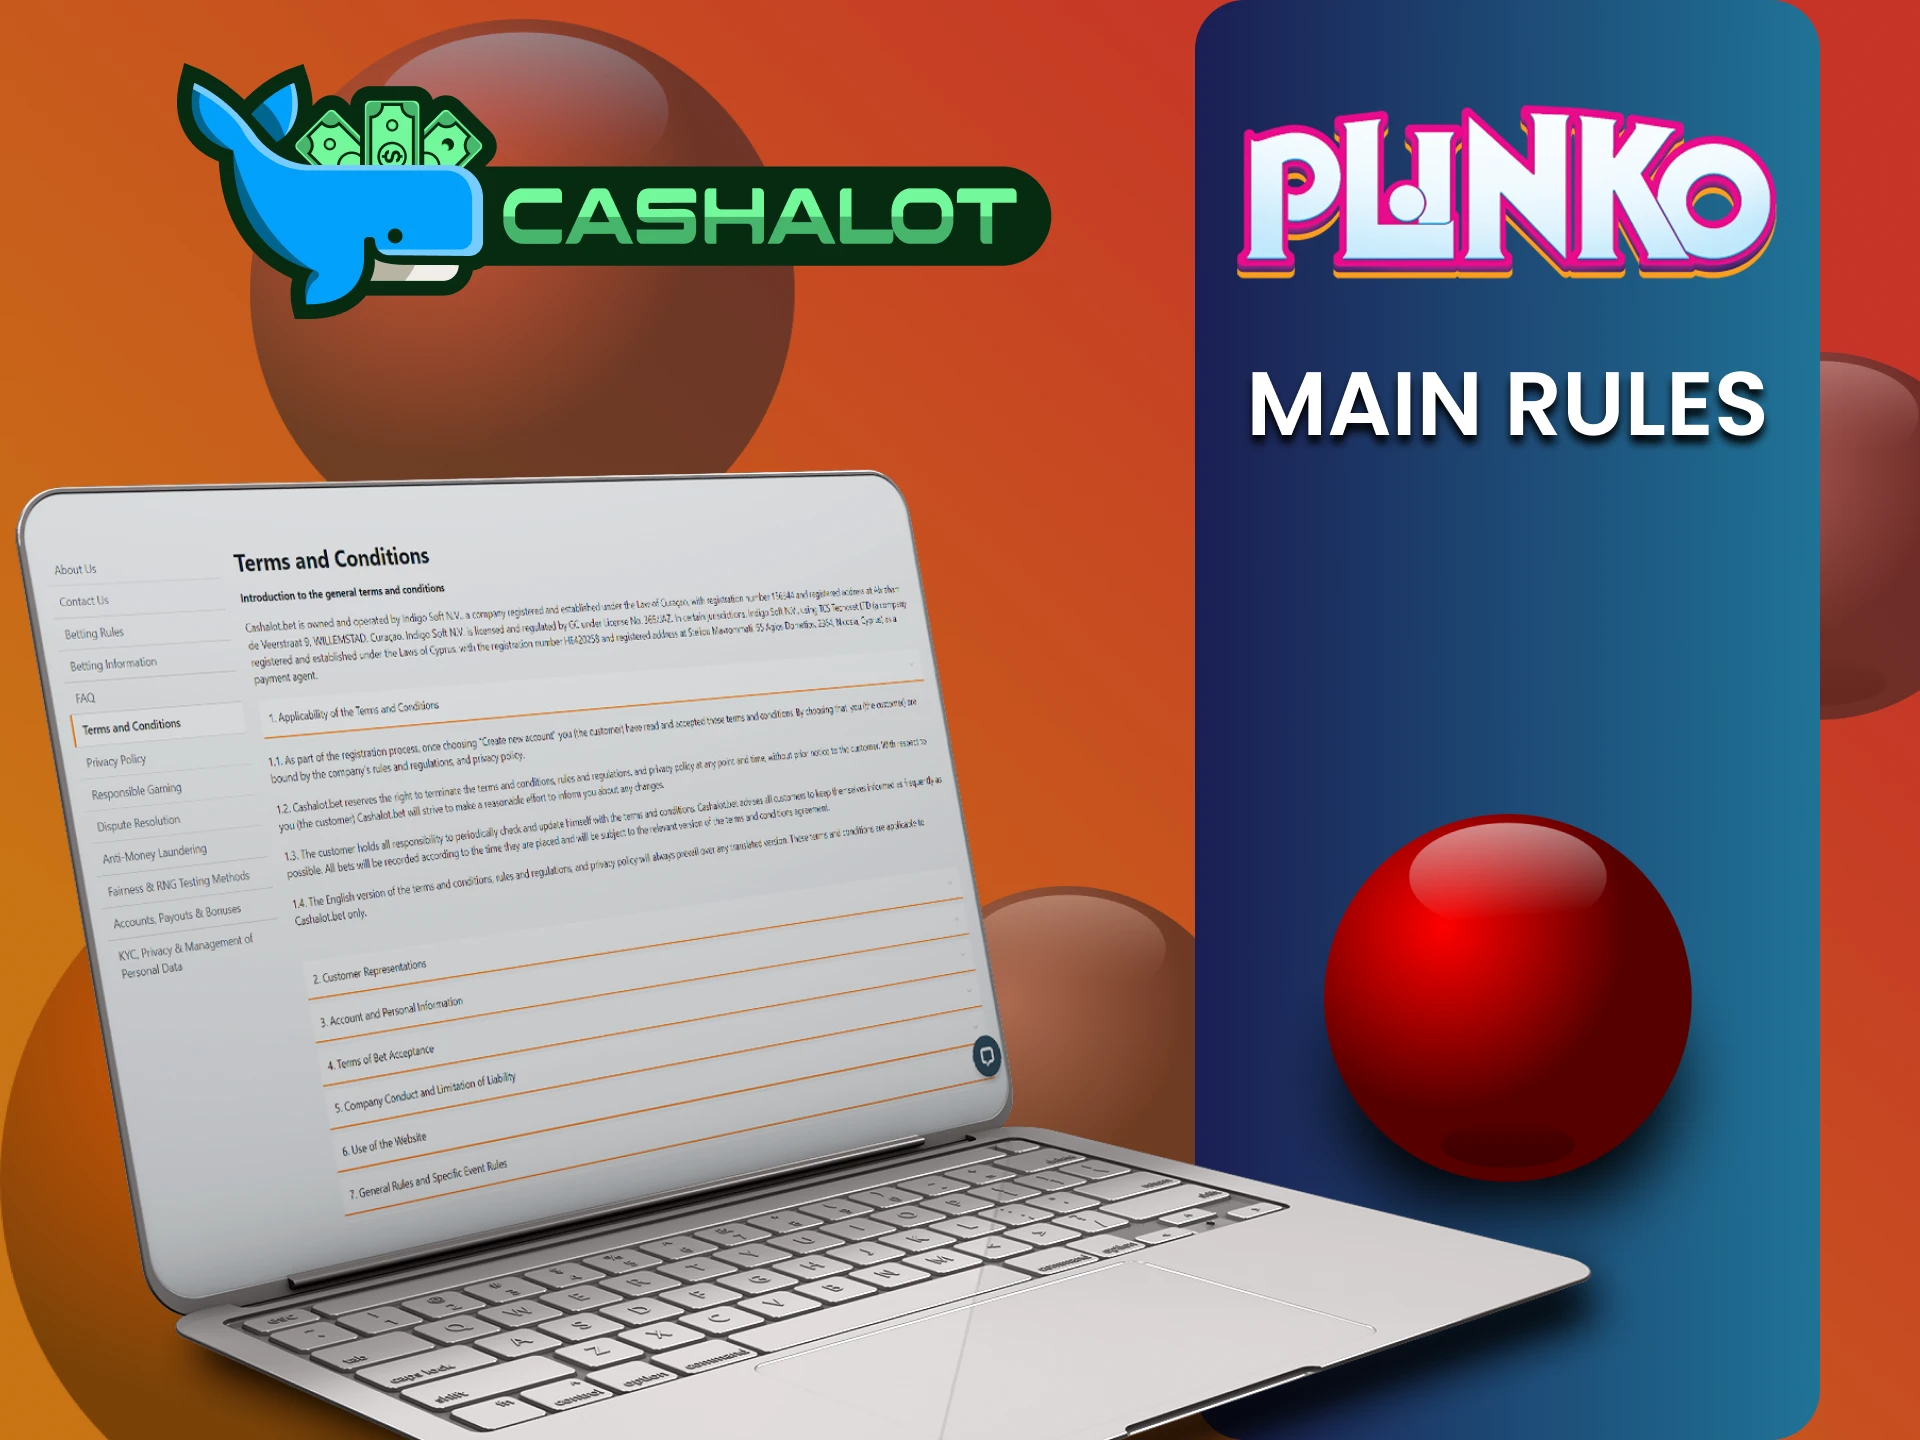 The Cashalot website has rules that you should study before playing Plinko.